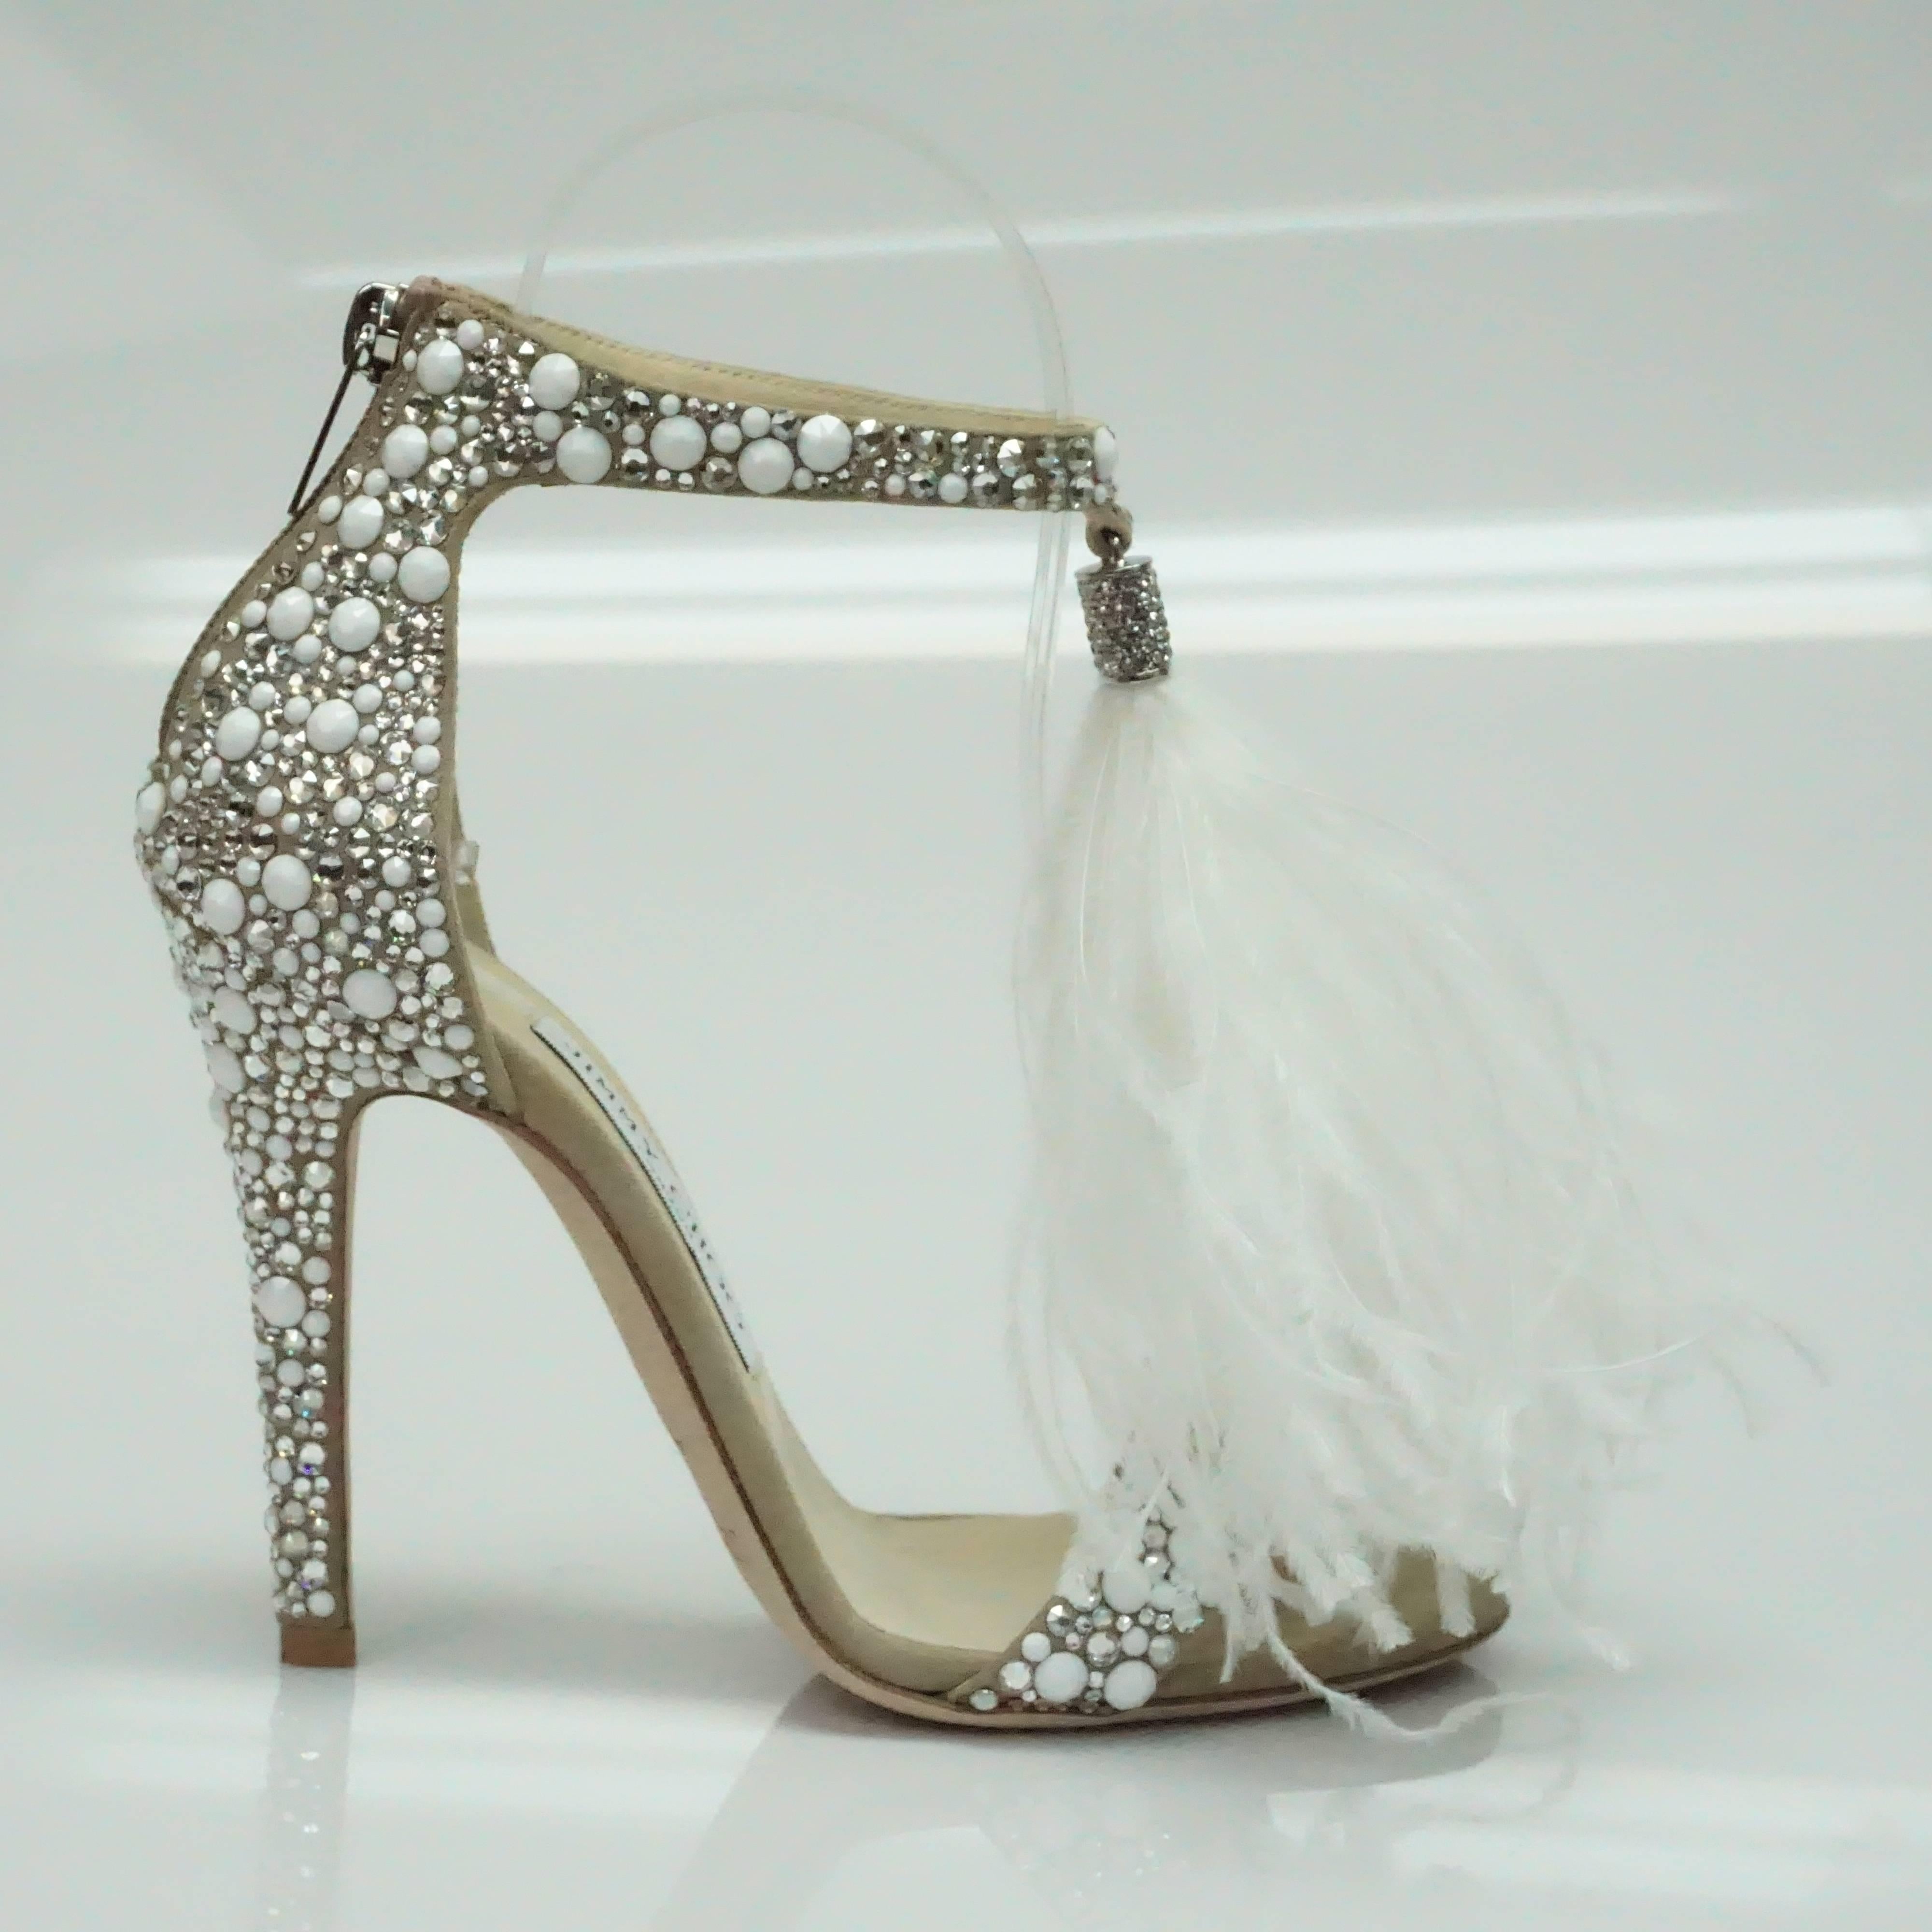 Jimmy Choo Viola White/Crystal Mix Wedding Sandals - NEVER USED - 36  These spectacular, sold out Wedding shoes are a nude color suede and are completely covered with white stones and crystals. They have a white hanging feather in the front hanging